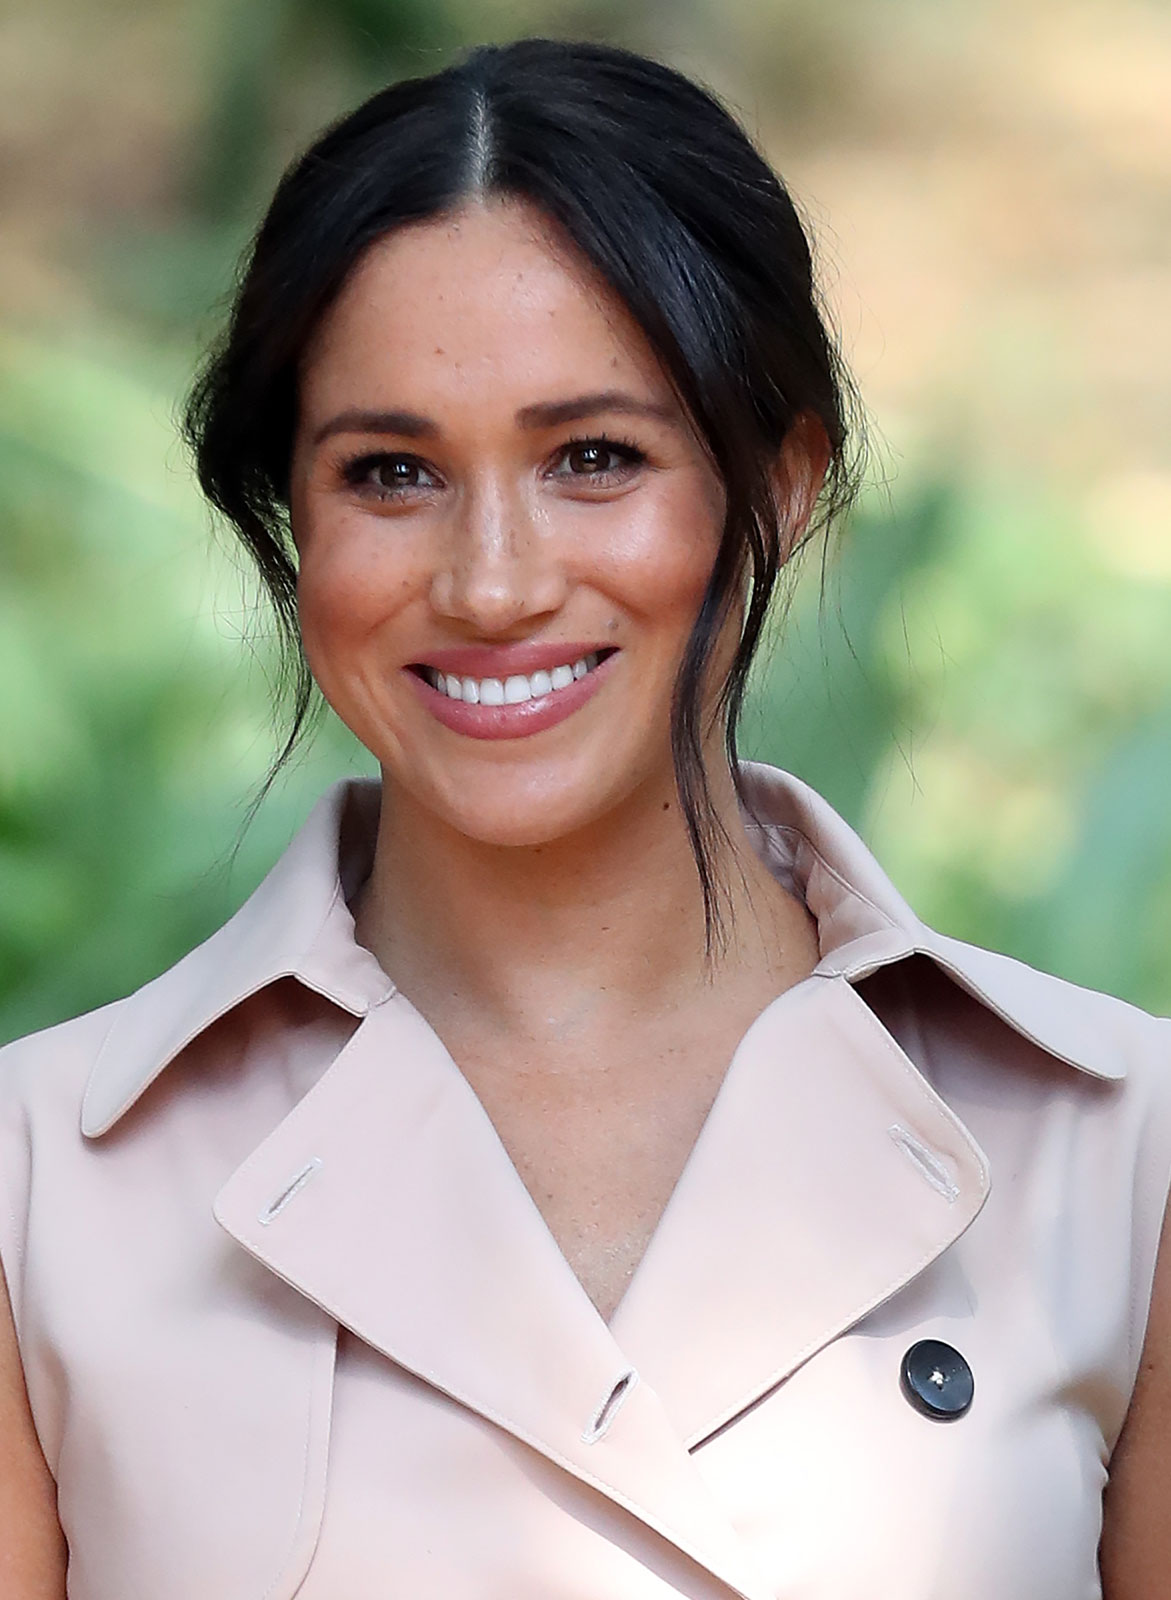 meghan-markle-has-the-most-popular-beauty-routine-on-google